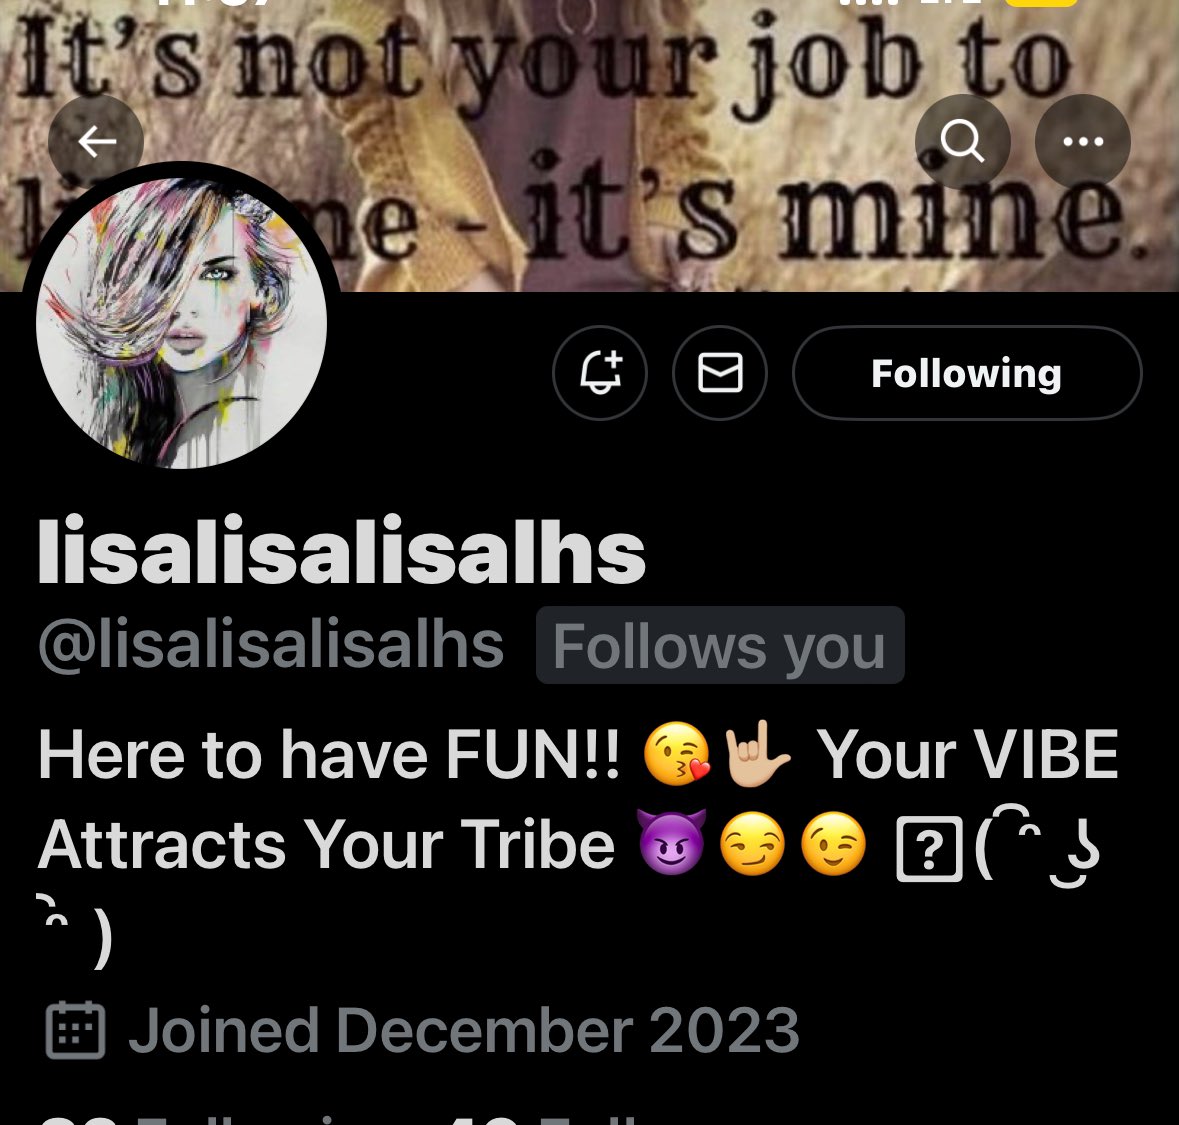 Let’s get Lisa reconnected! Follow @lisalisalisalhs That’s an ORDER! You won’t regret it 😉 She’s a UHMAZING ❤️